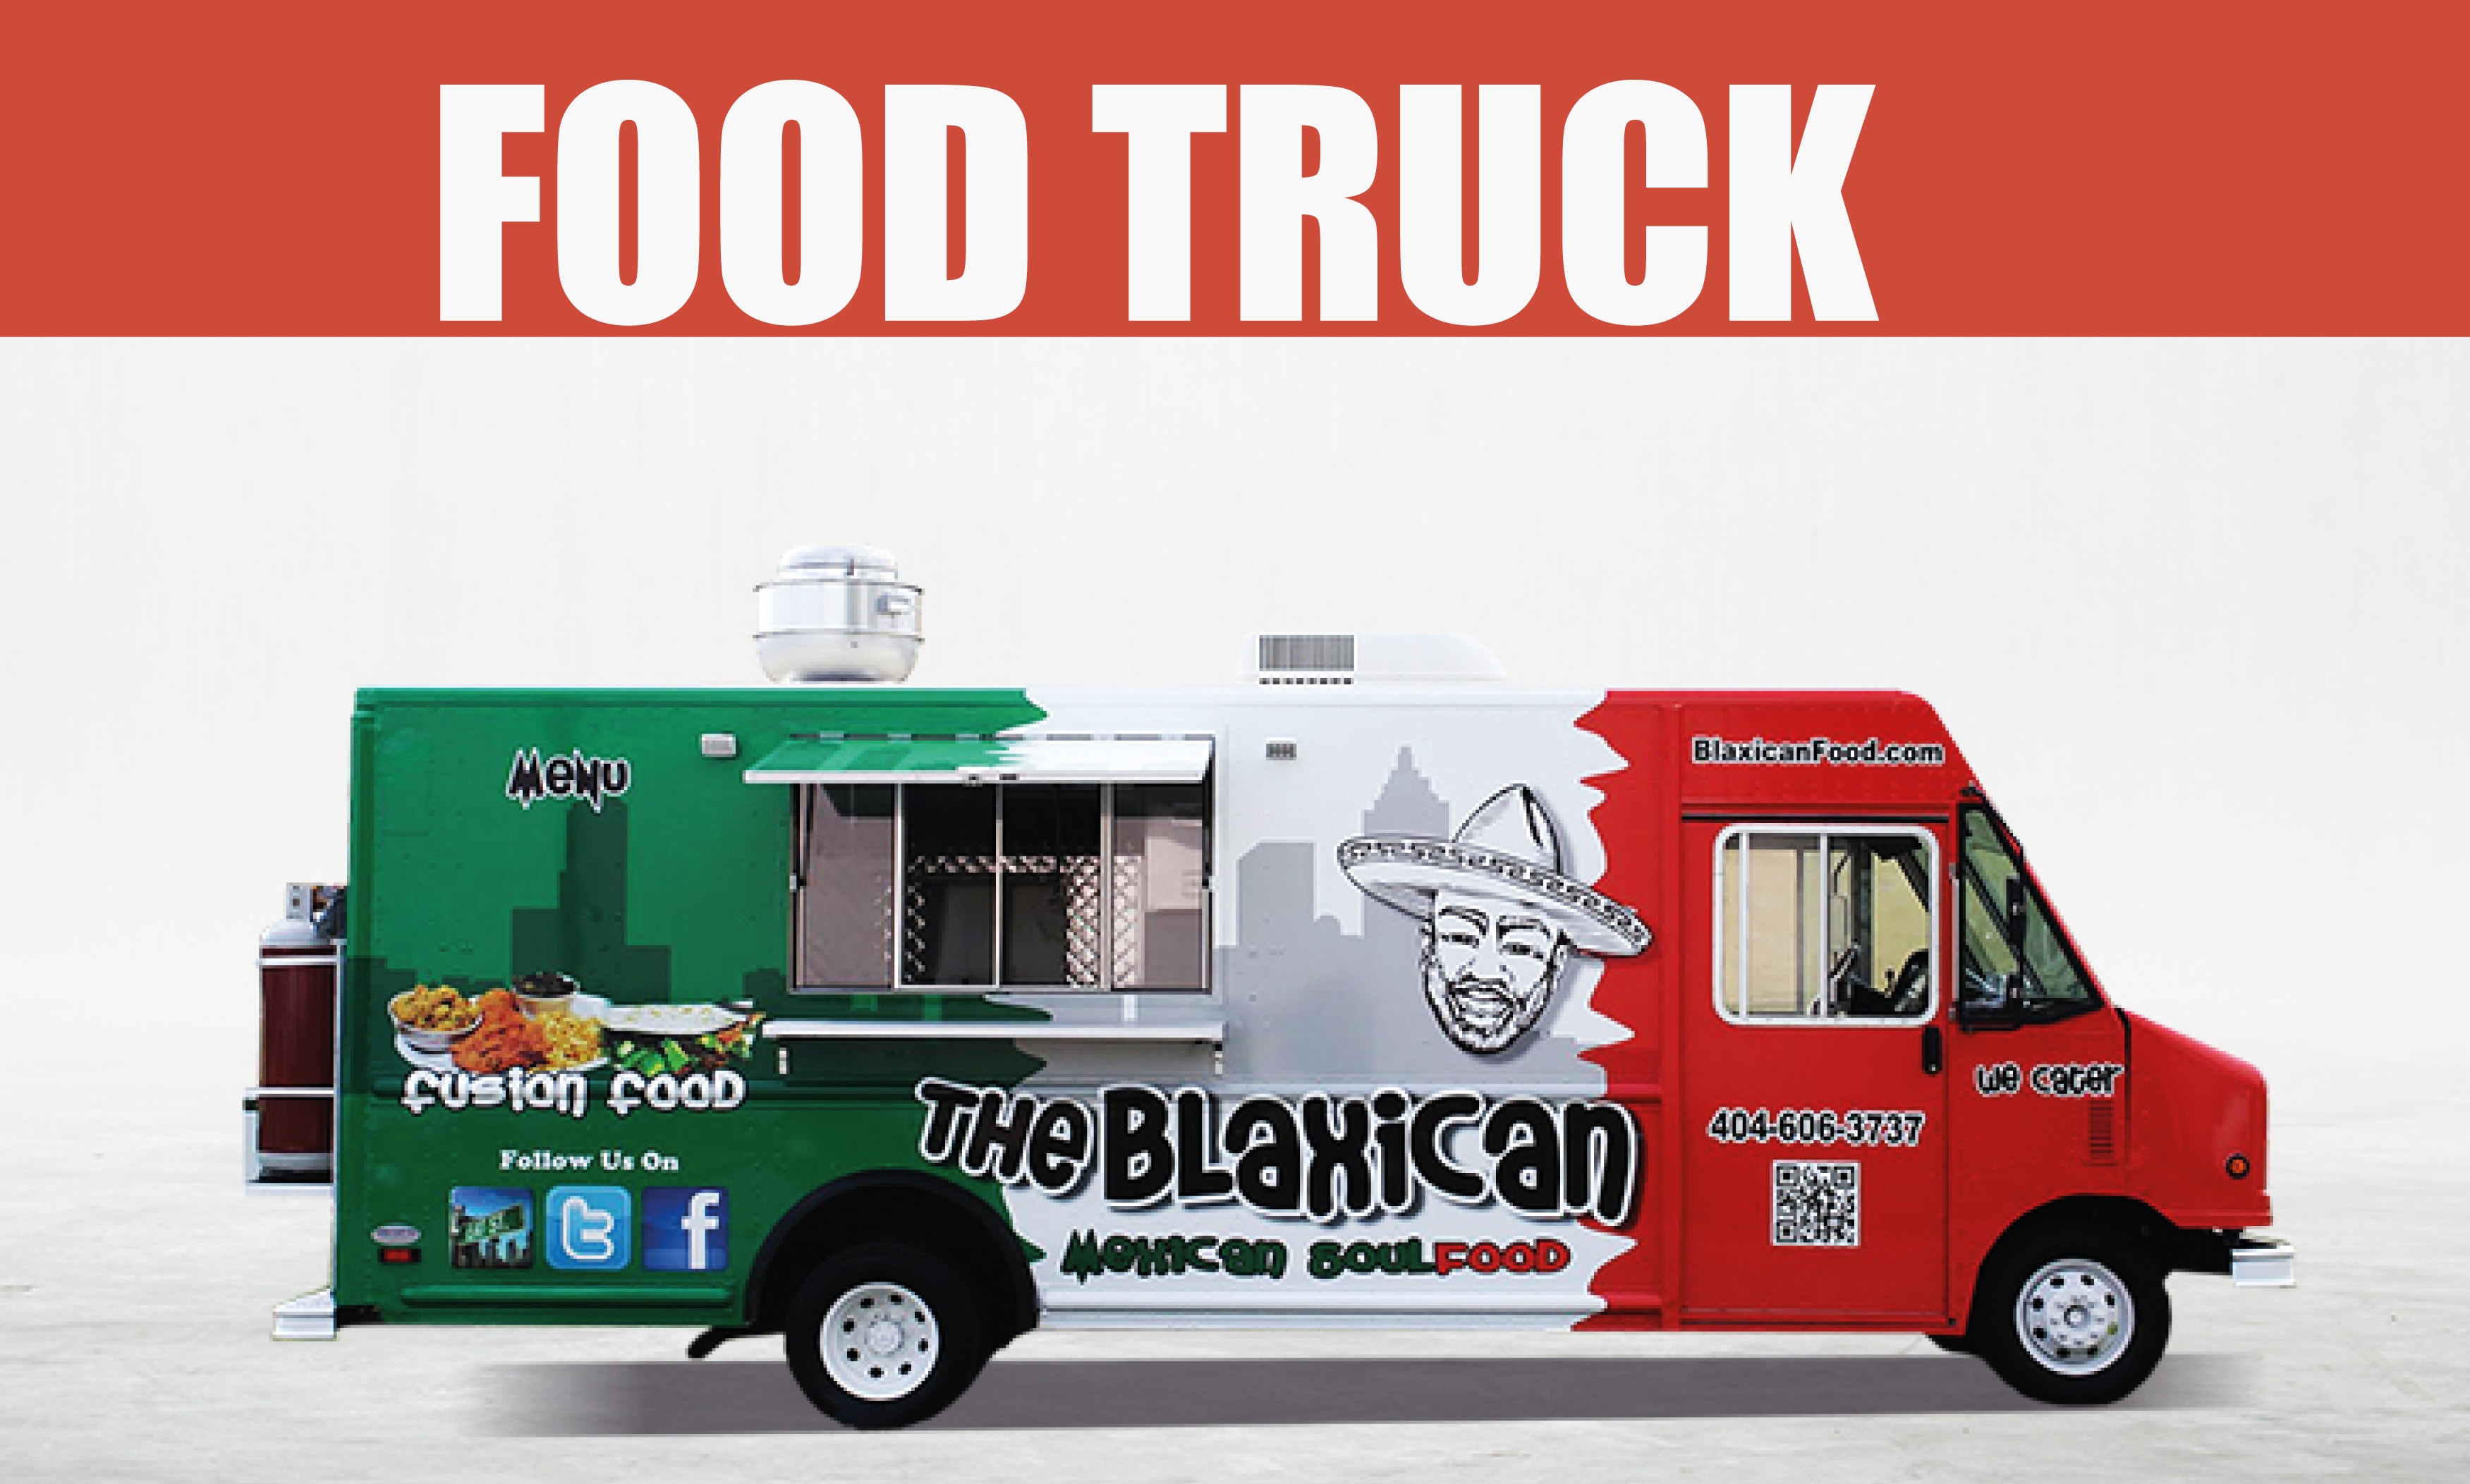 greatly-wrap-and-perfect-food-truck-wrap-design-in-24-hours.jpg